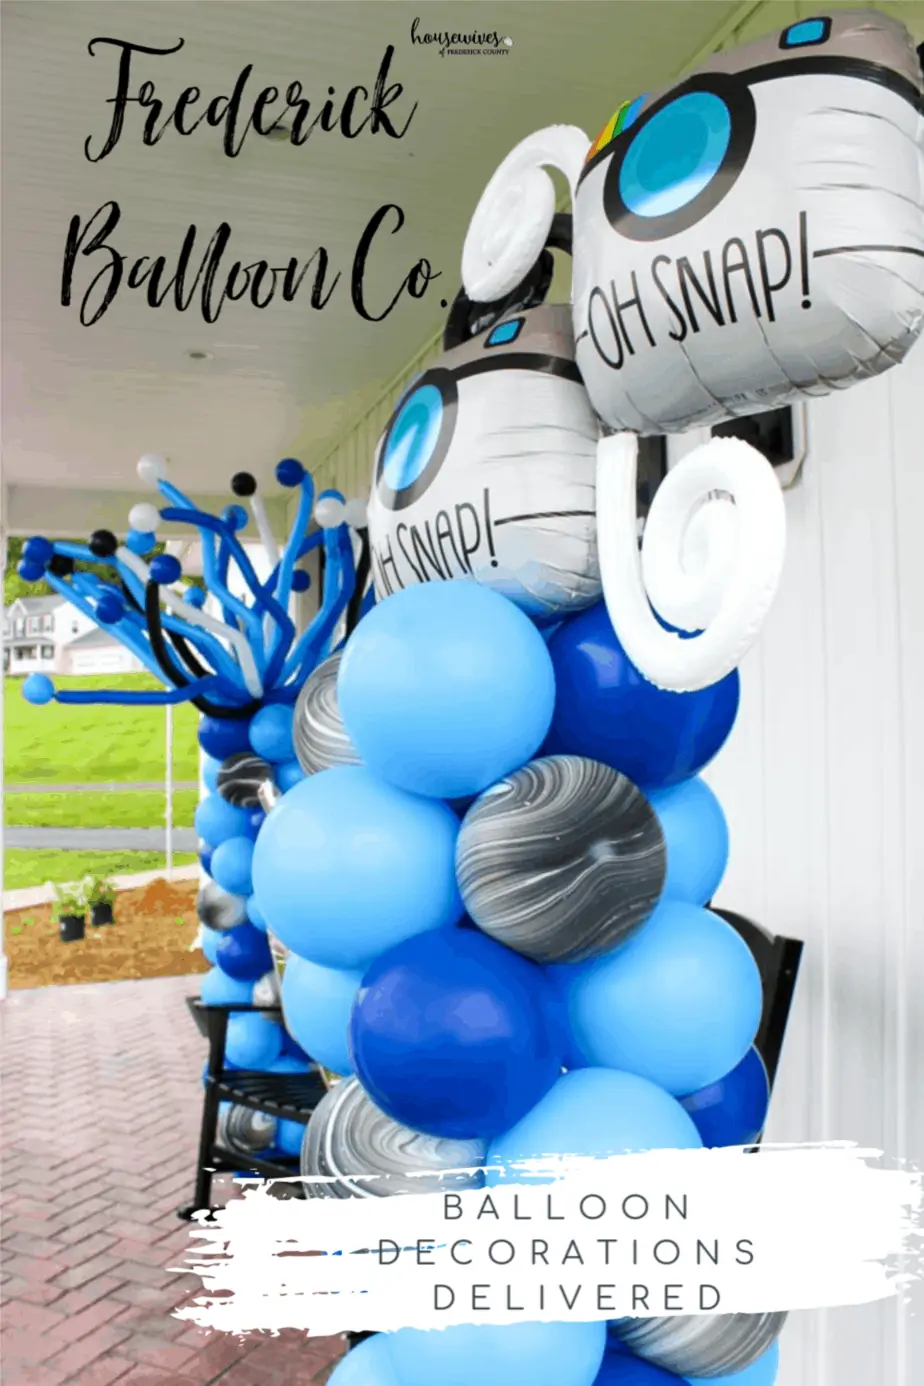 Frederick Balloon Co: Balloon Decorations Delivered!